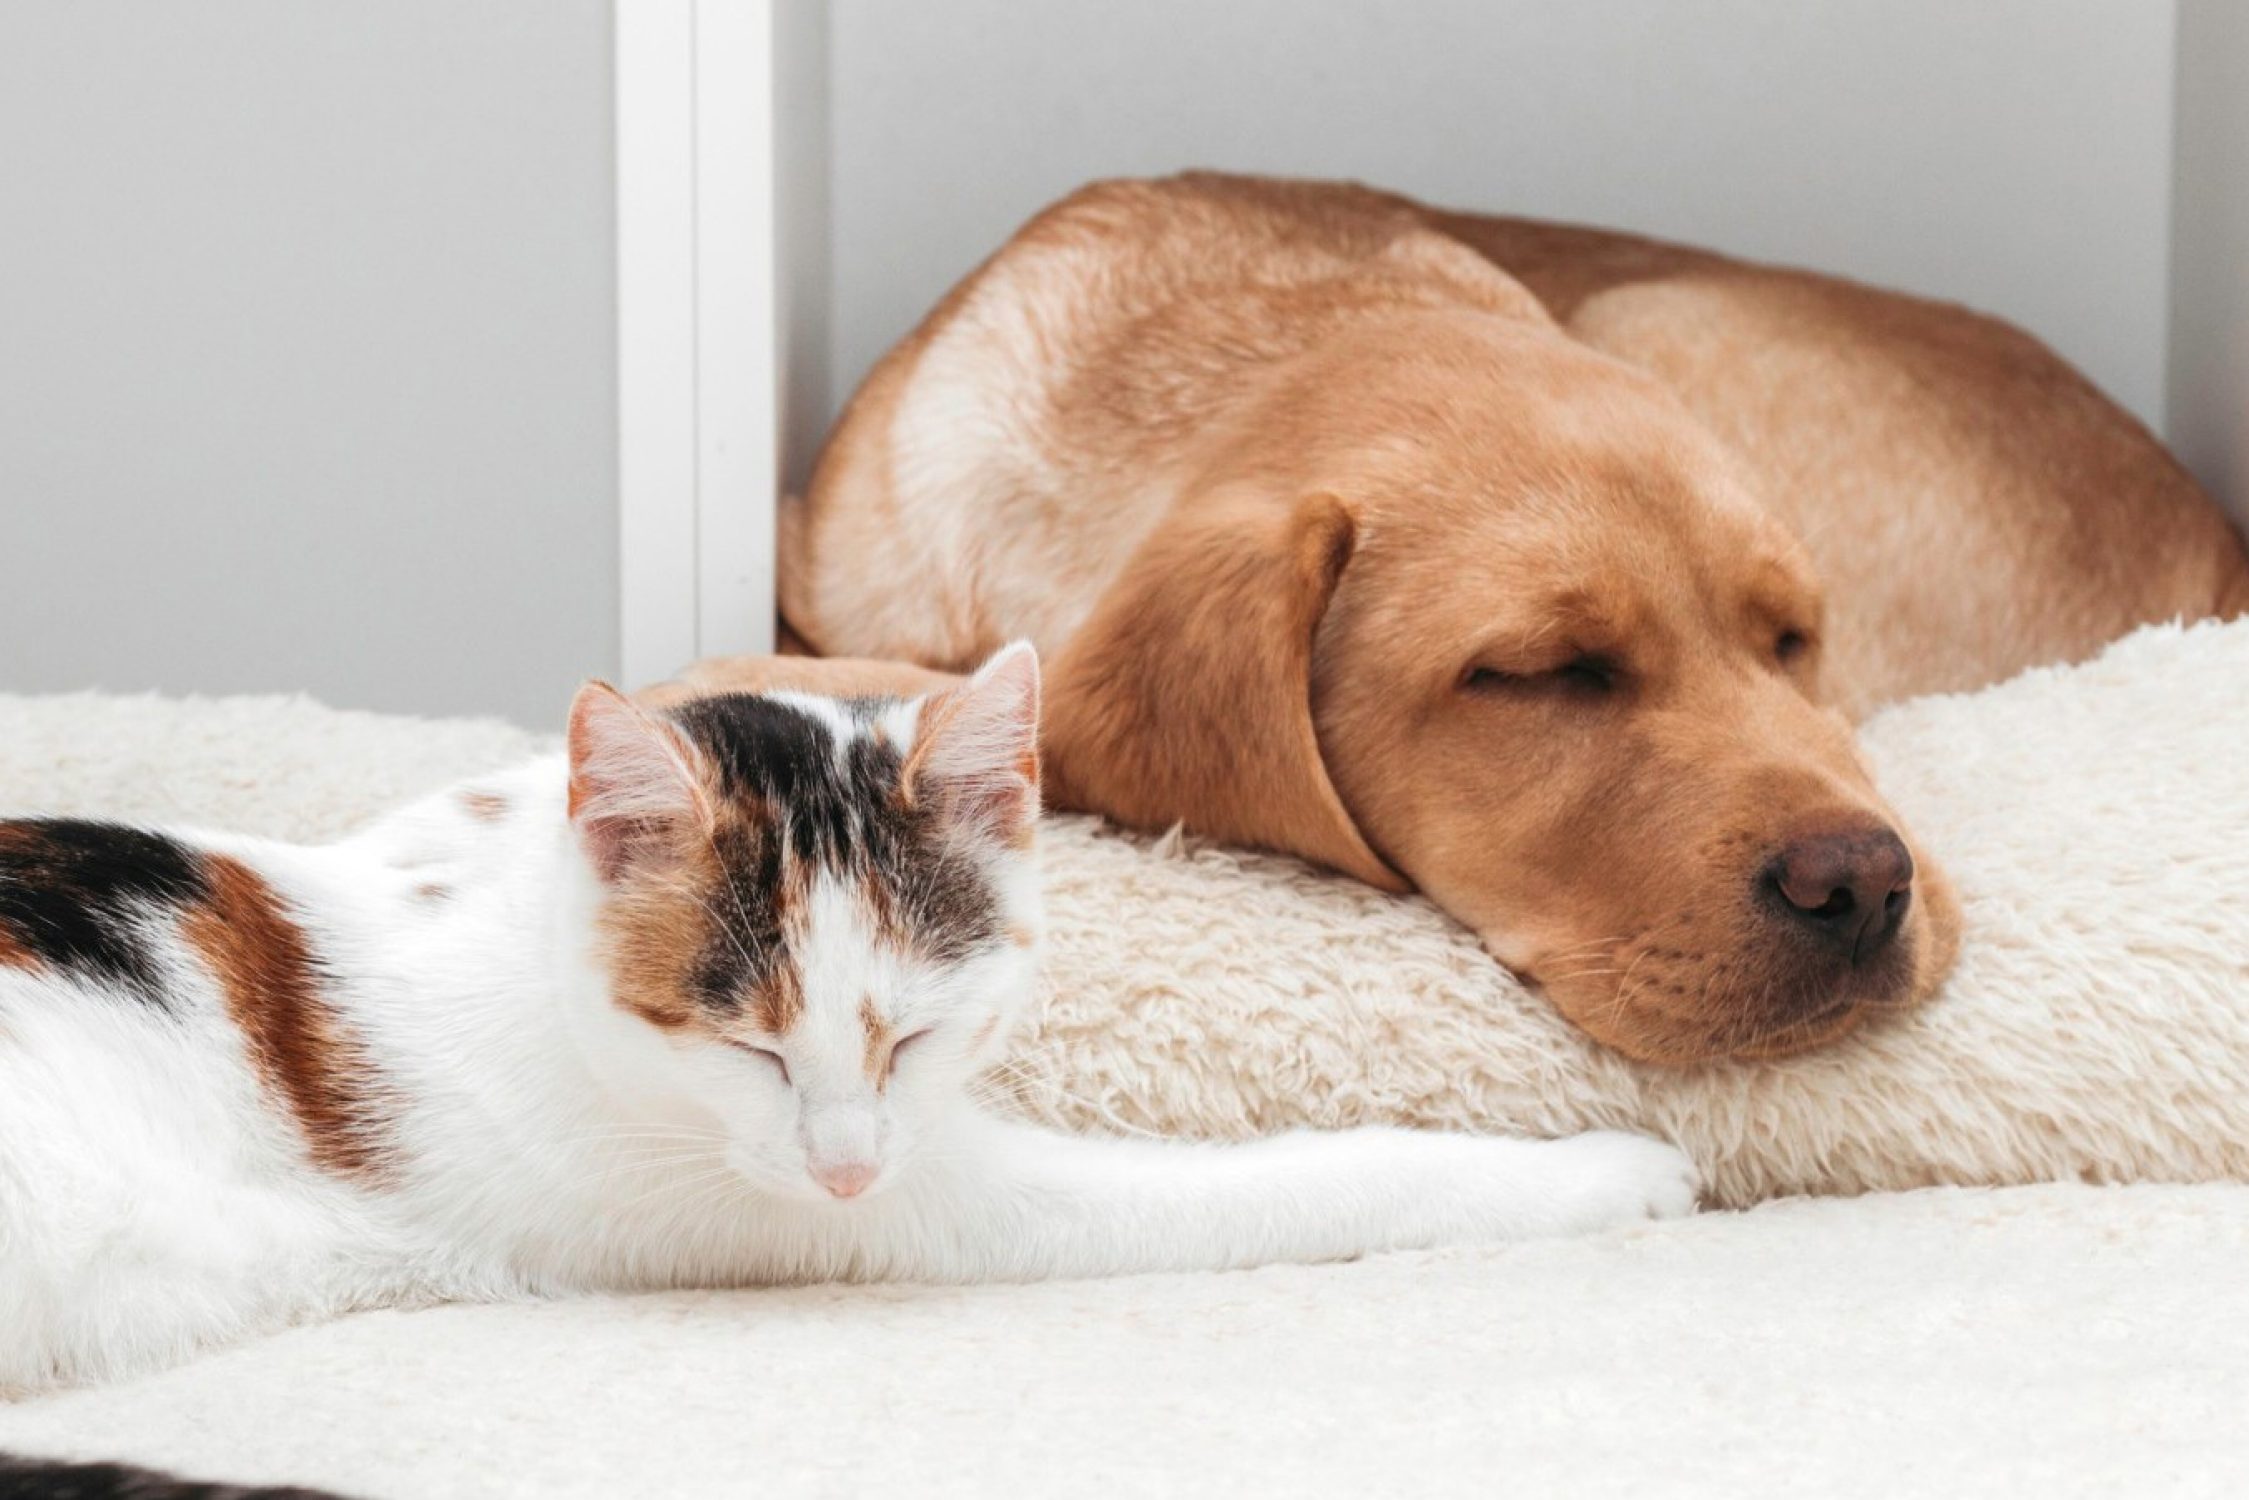 A dog and a cat sleeping next to each other.